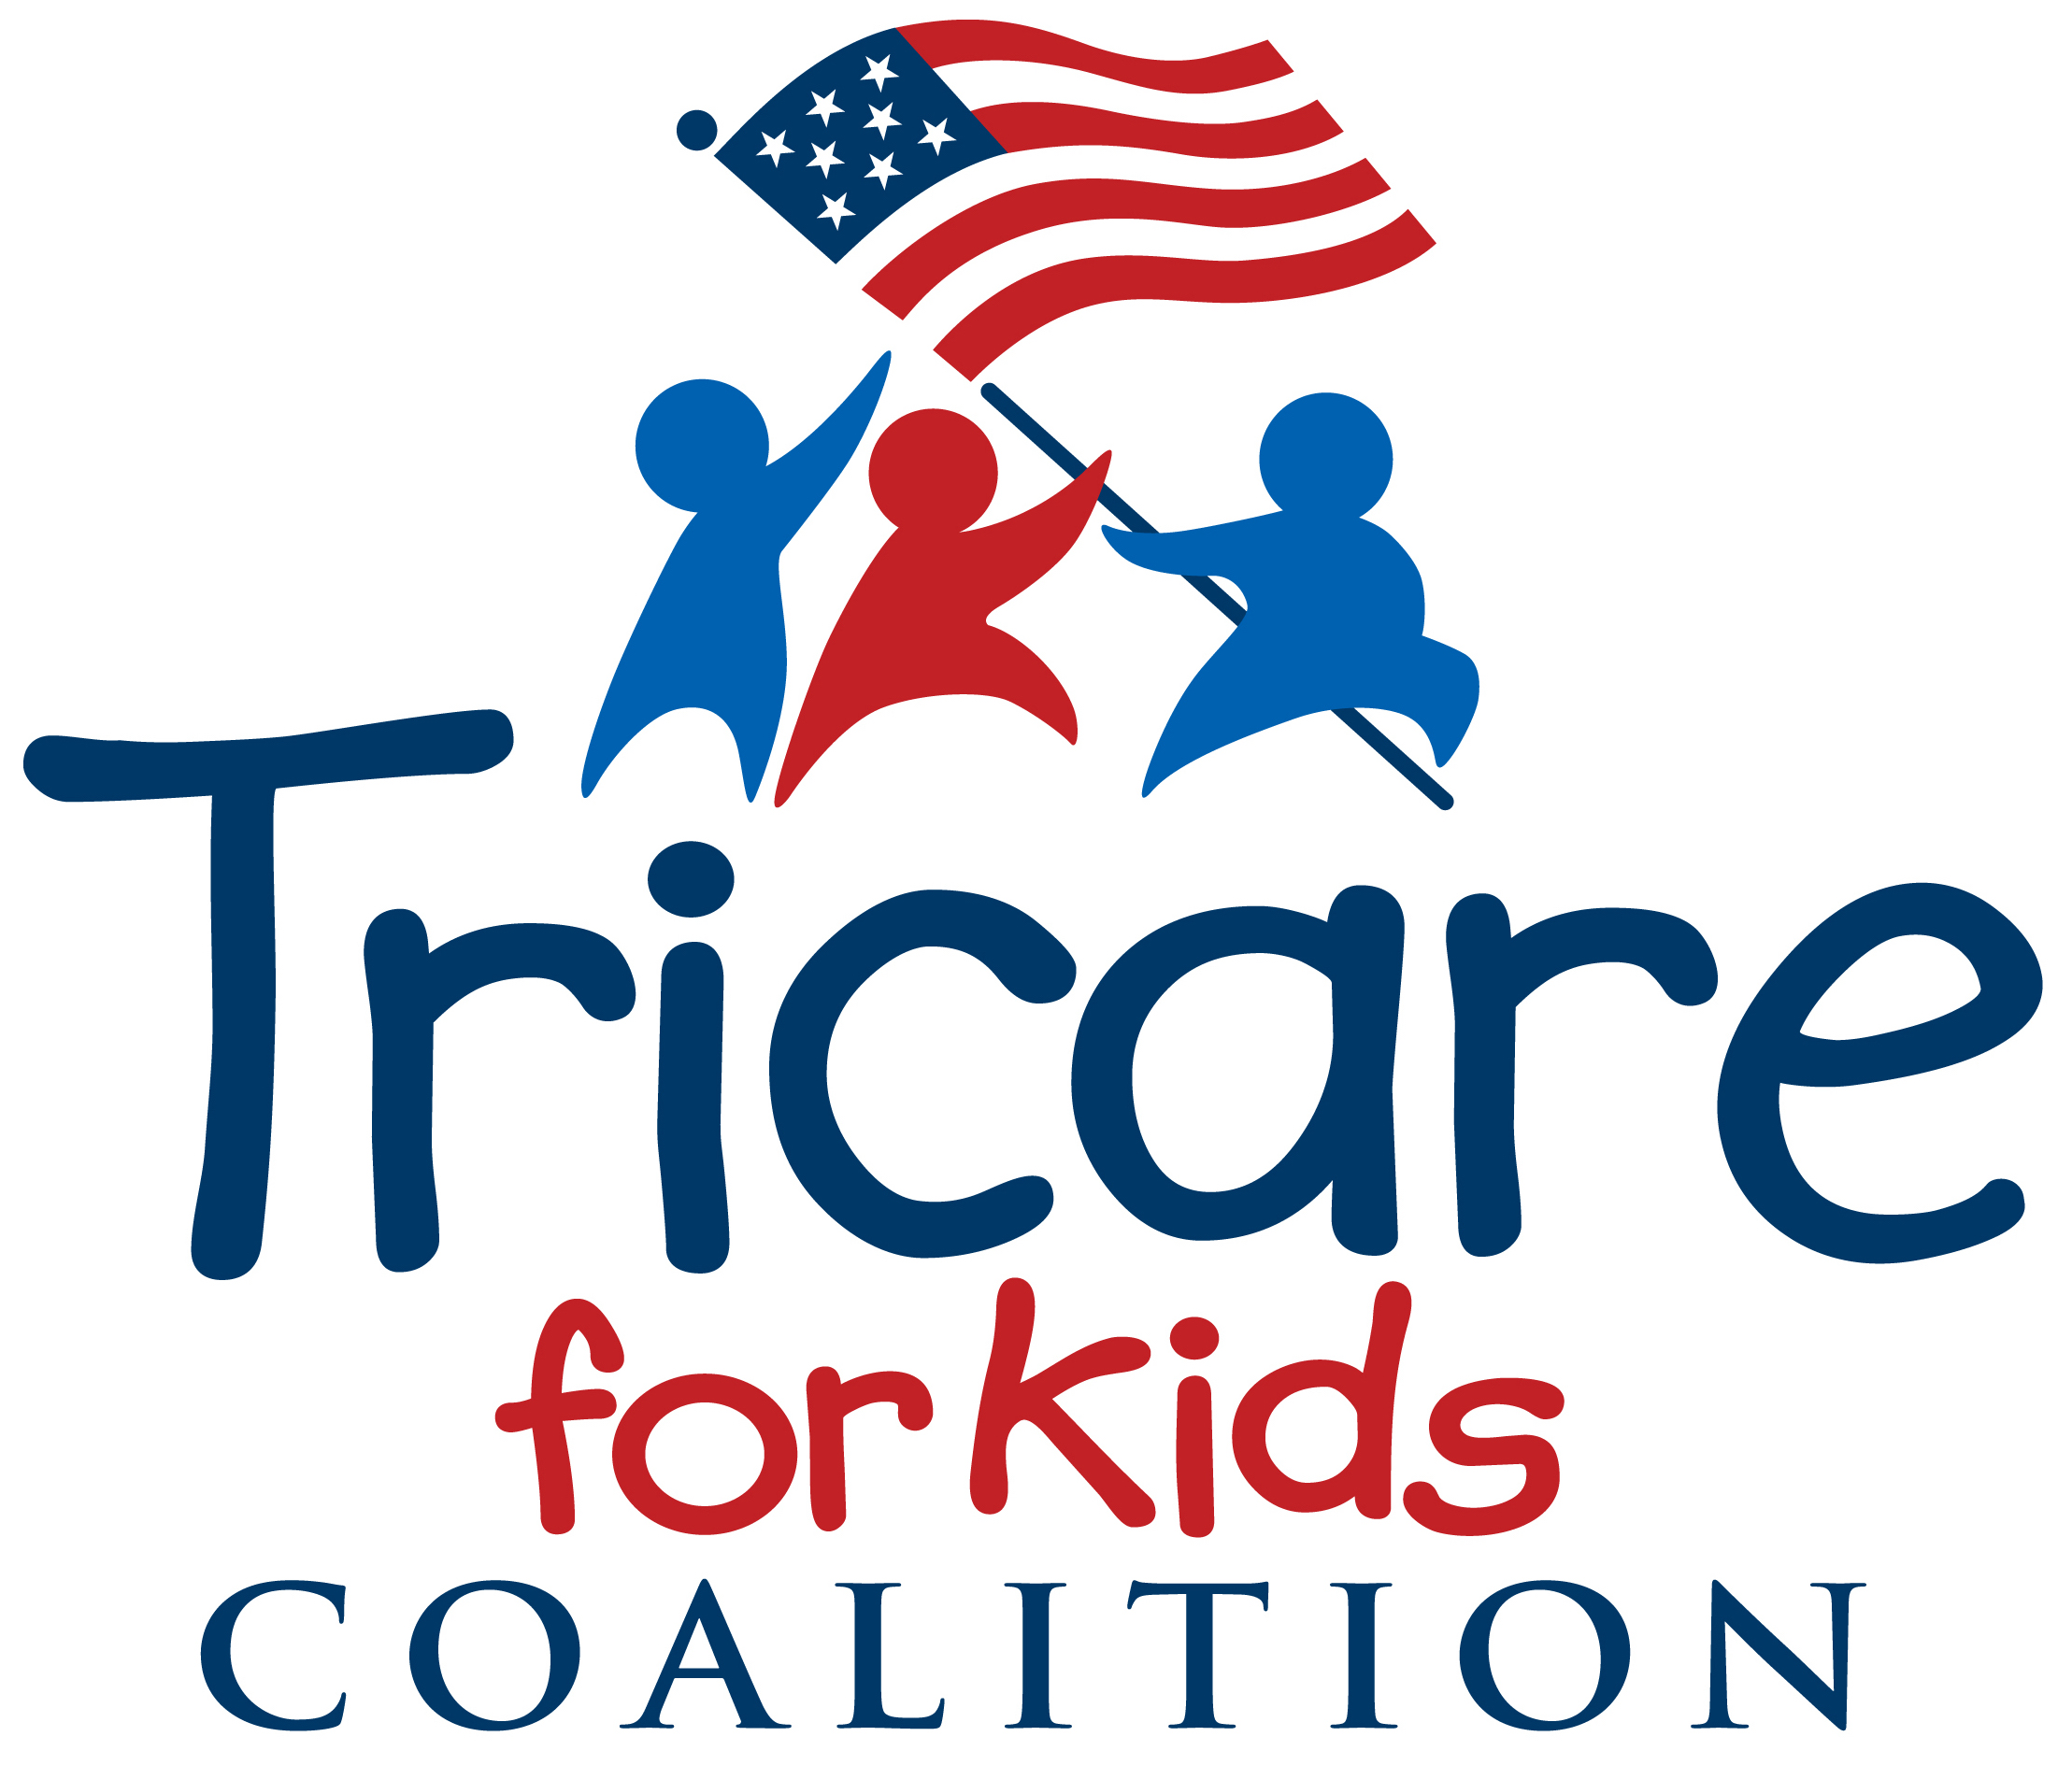 Tricare for Kids Coalition